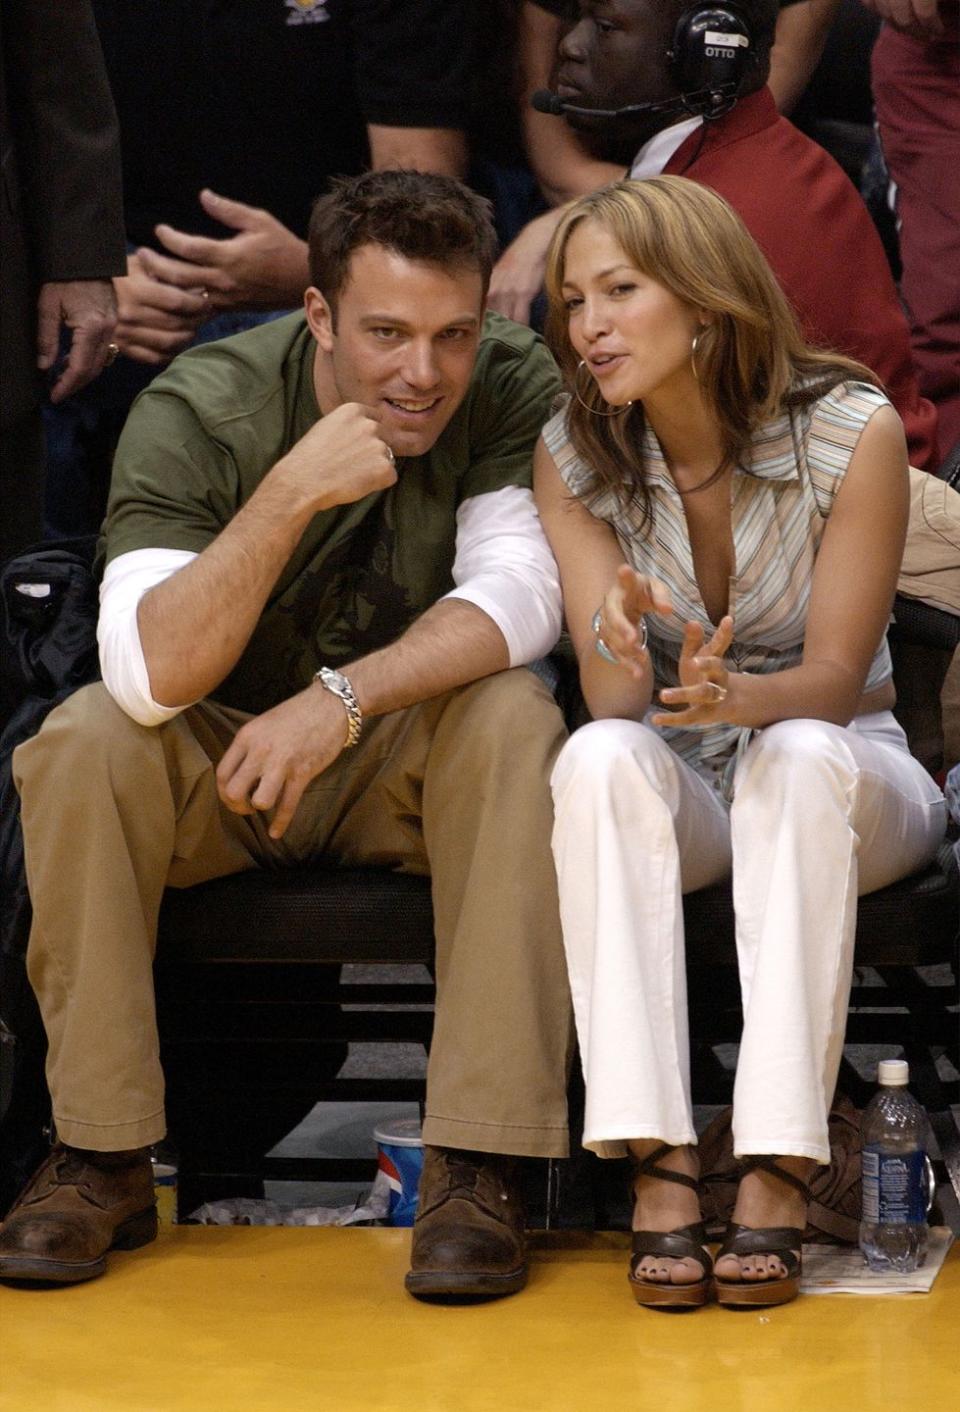 Luxuriate in These Early 2000s Photos of Ben Affleck and Jennifer Lopez